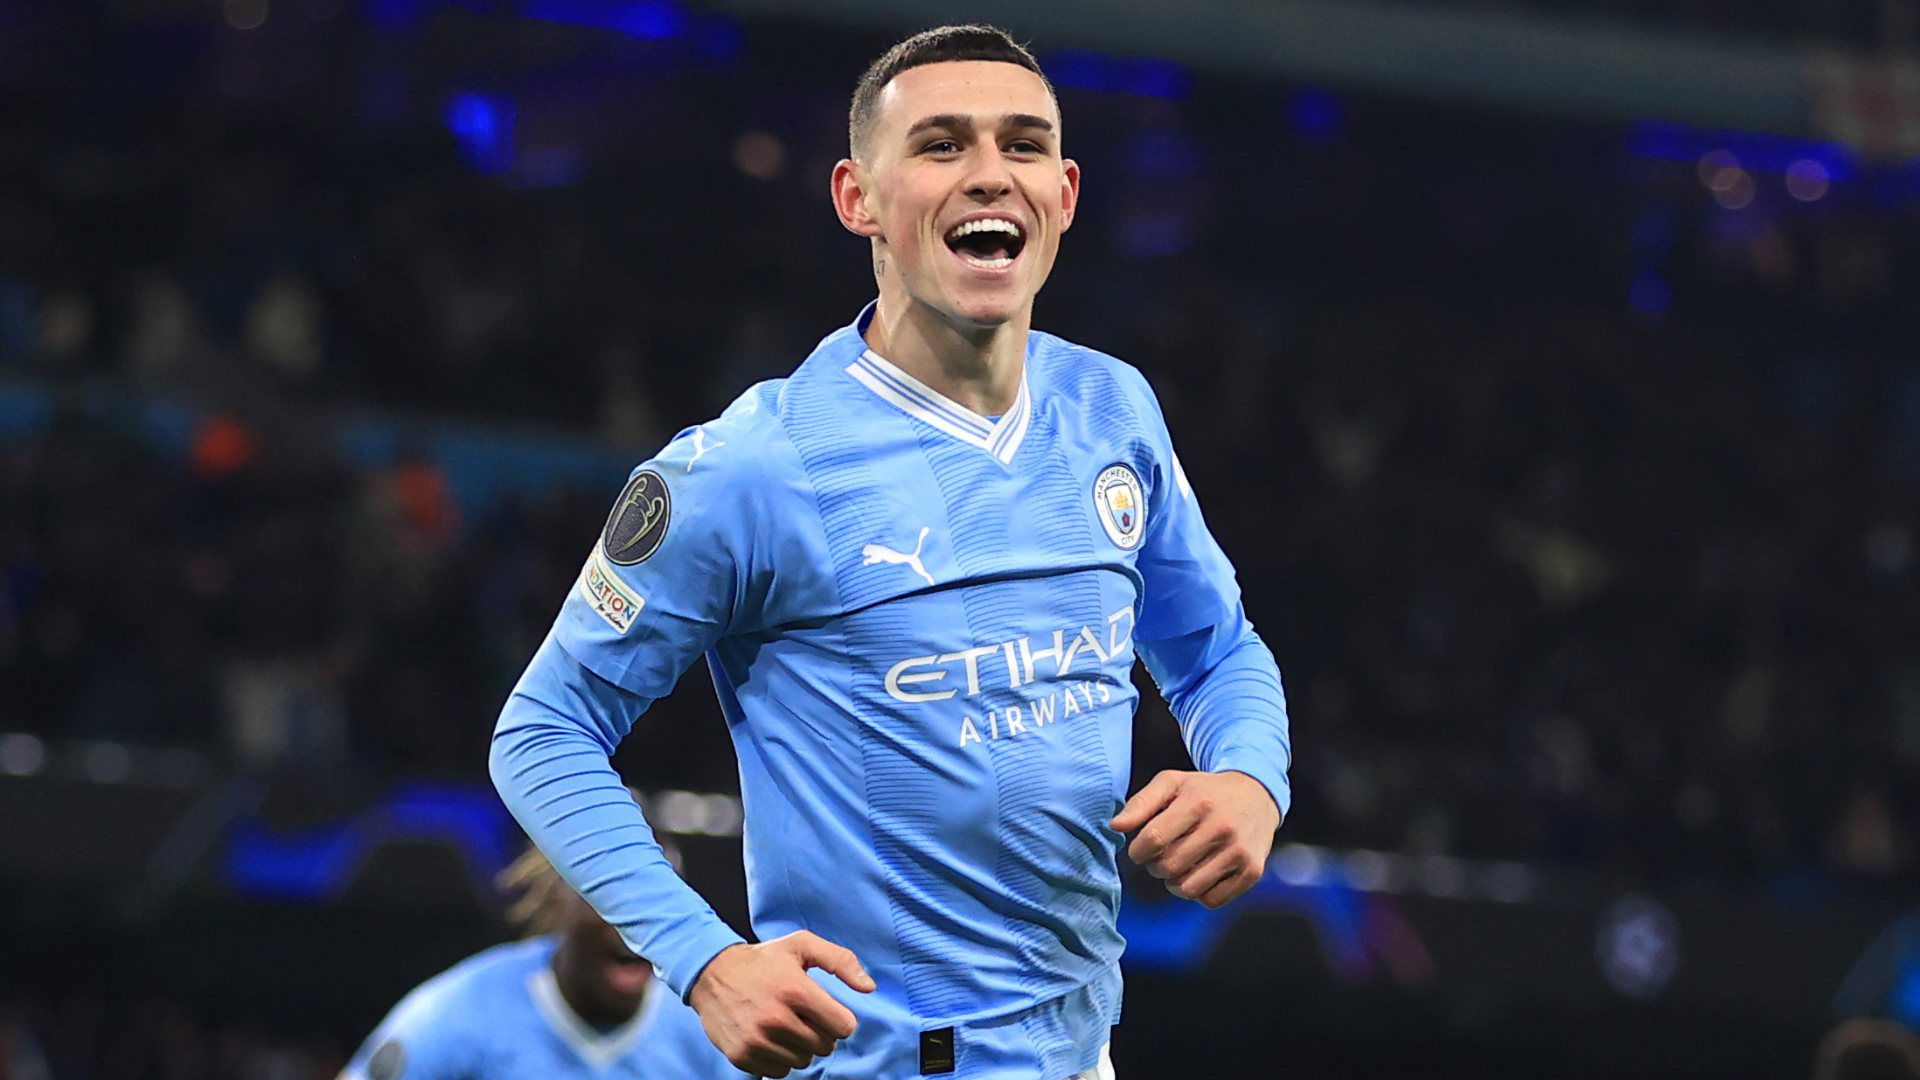 Phil Foden: Manchester City have sights set on another Treble